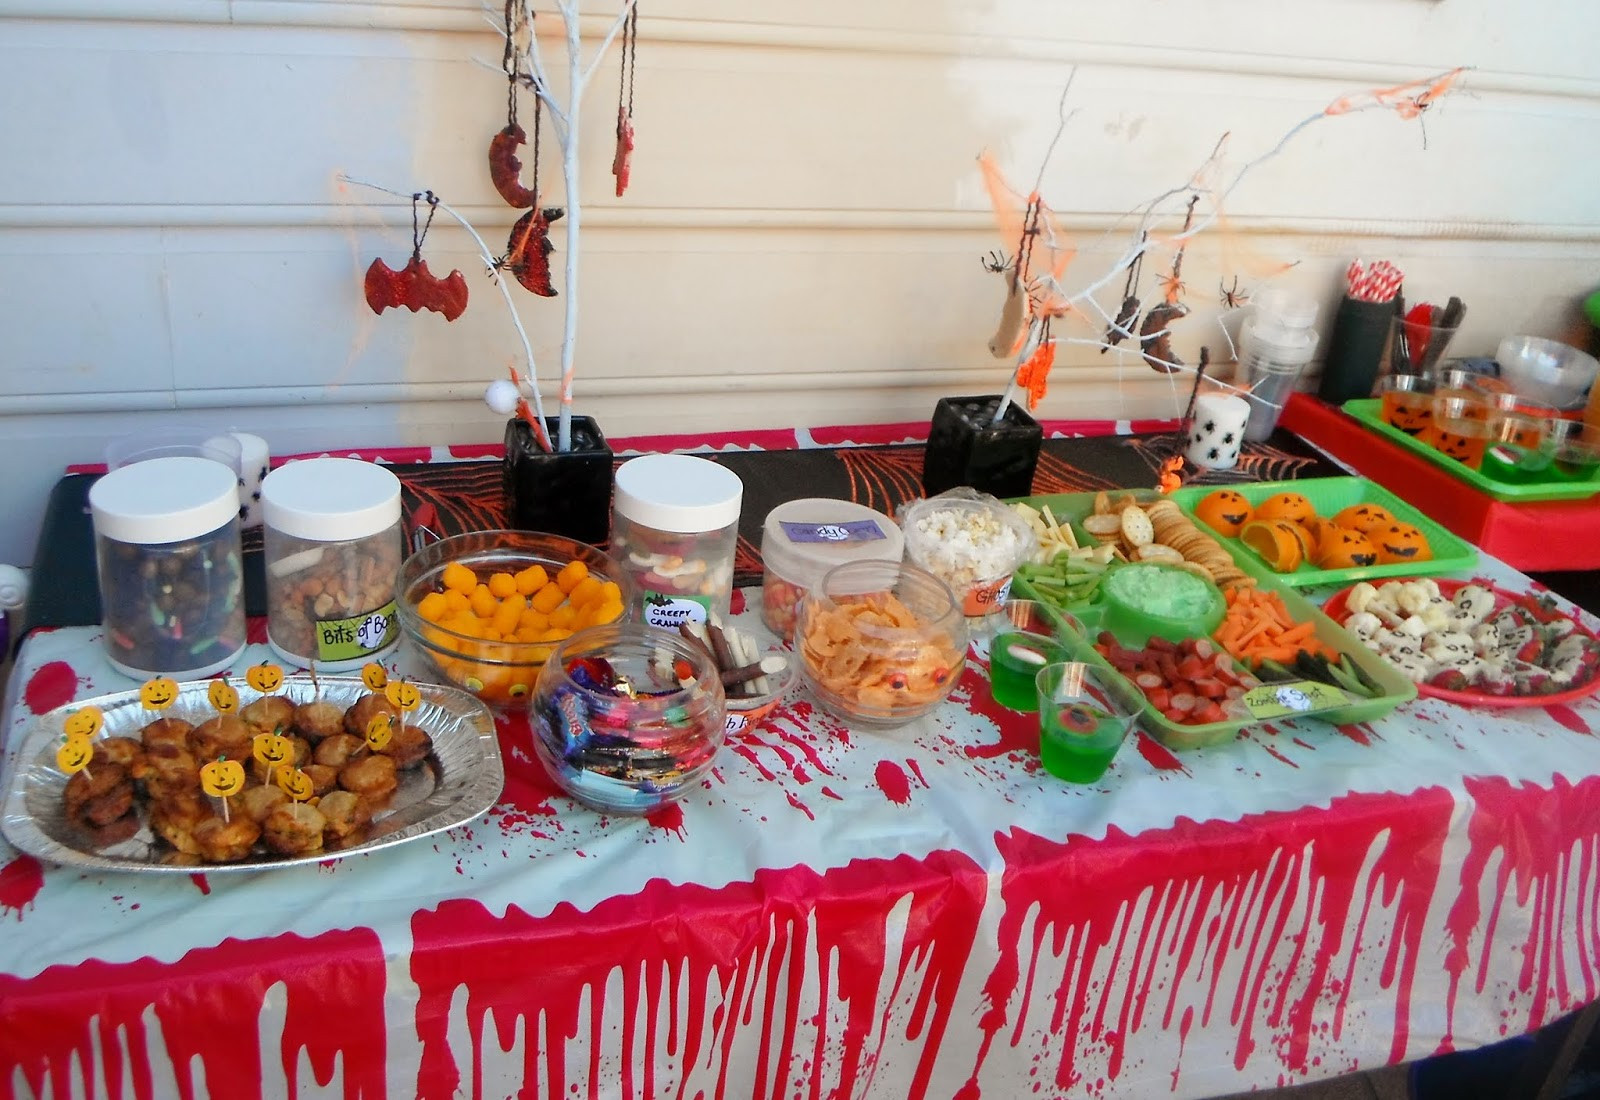 Fun Halloween Party Ideas For Adults
 Adventures at home with Mum Halloween Party Food